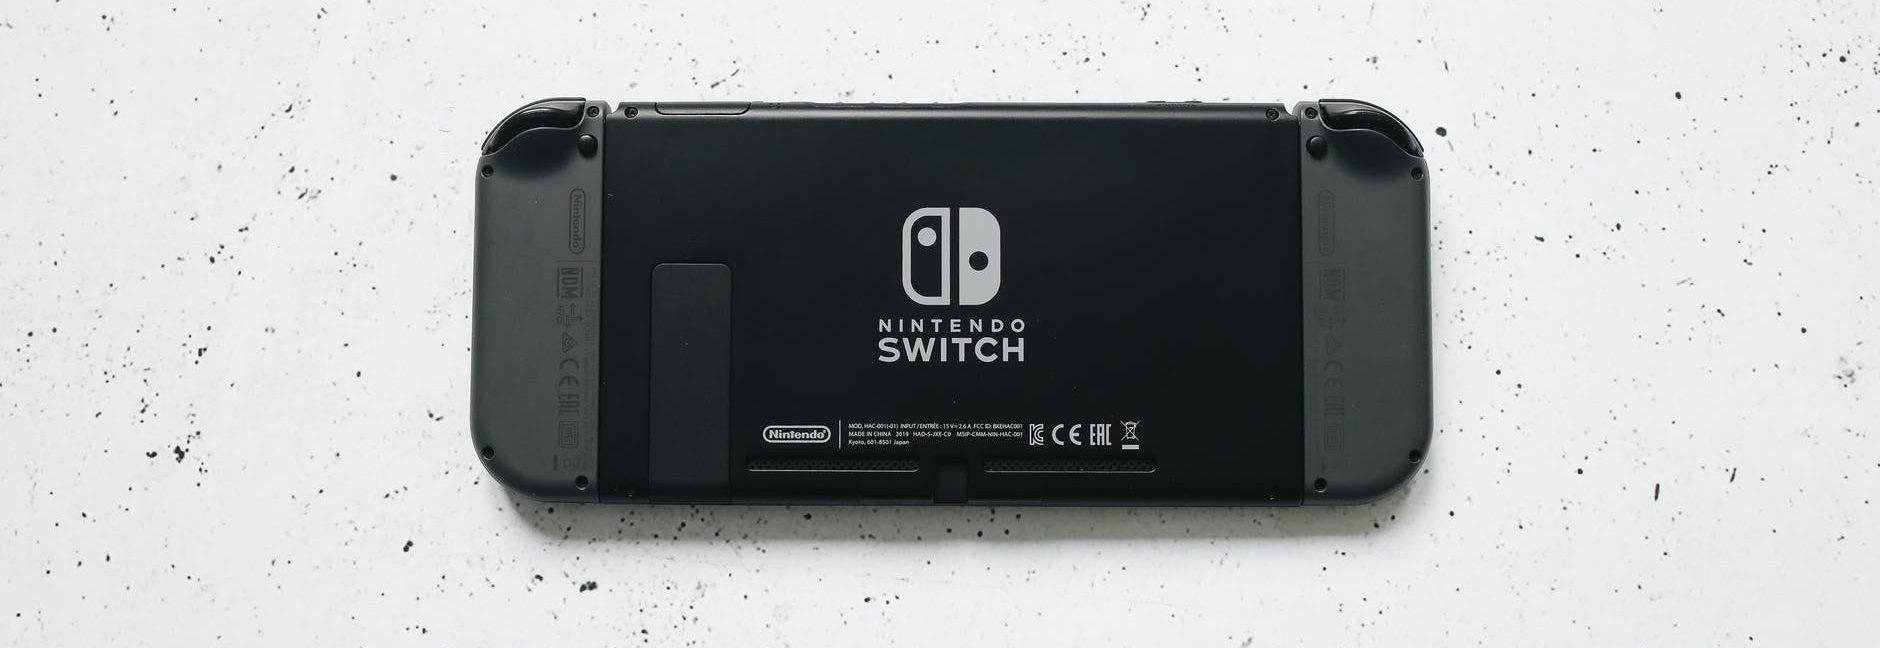 back of nintendo switch on marble surface